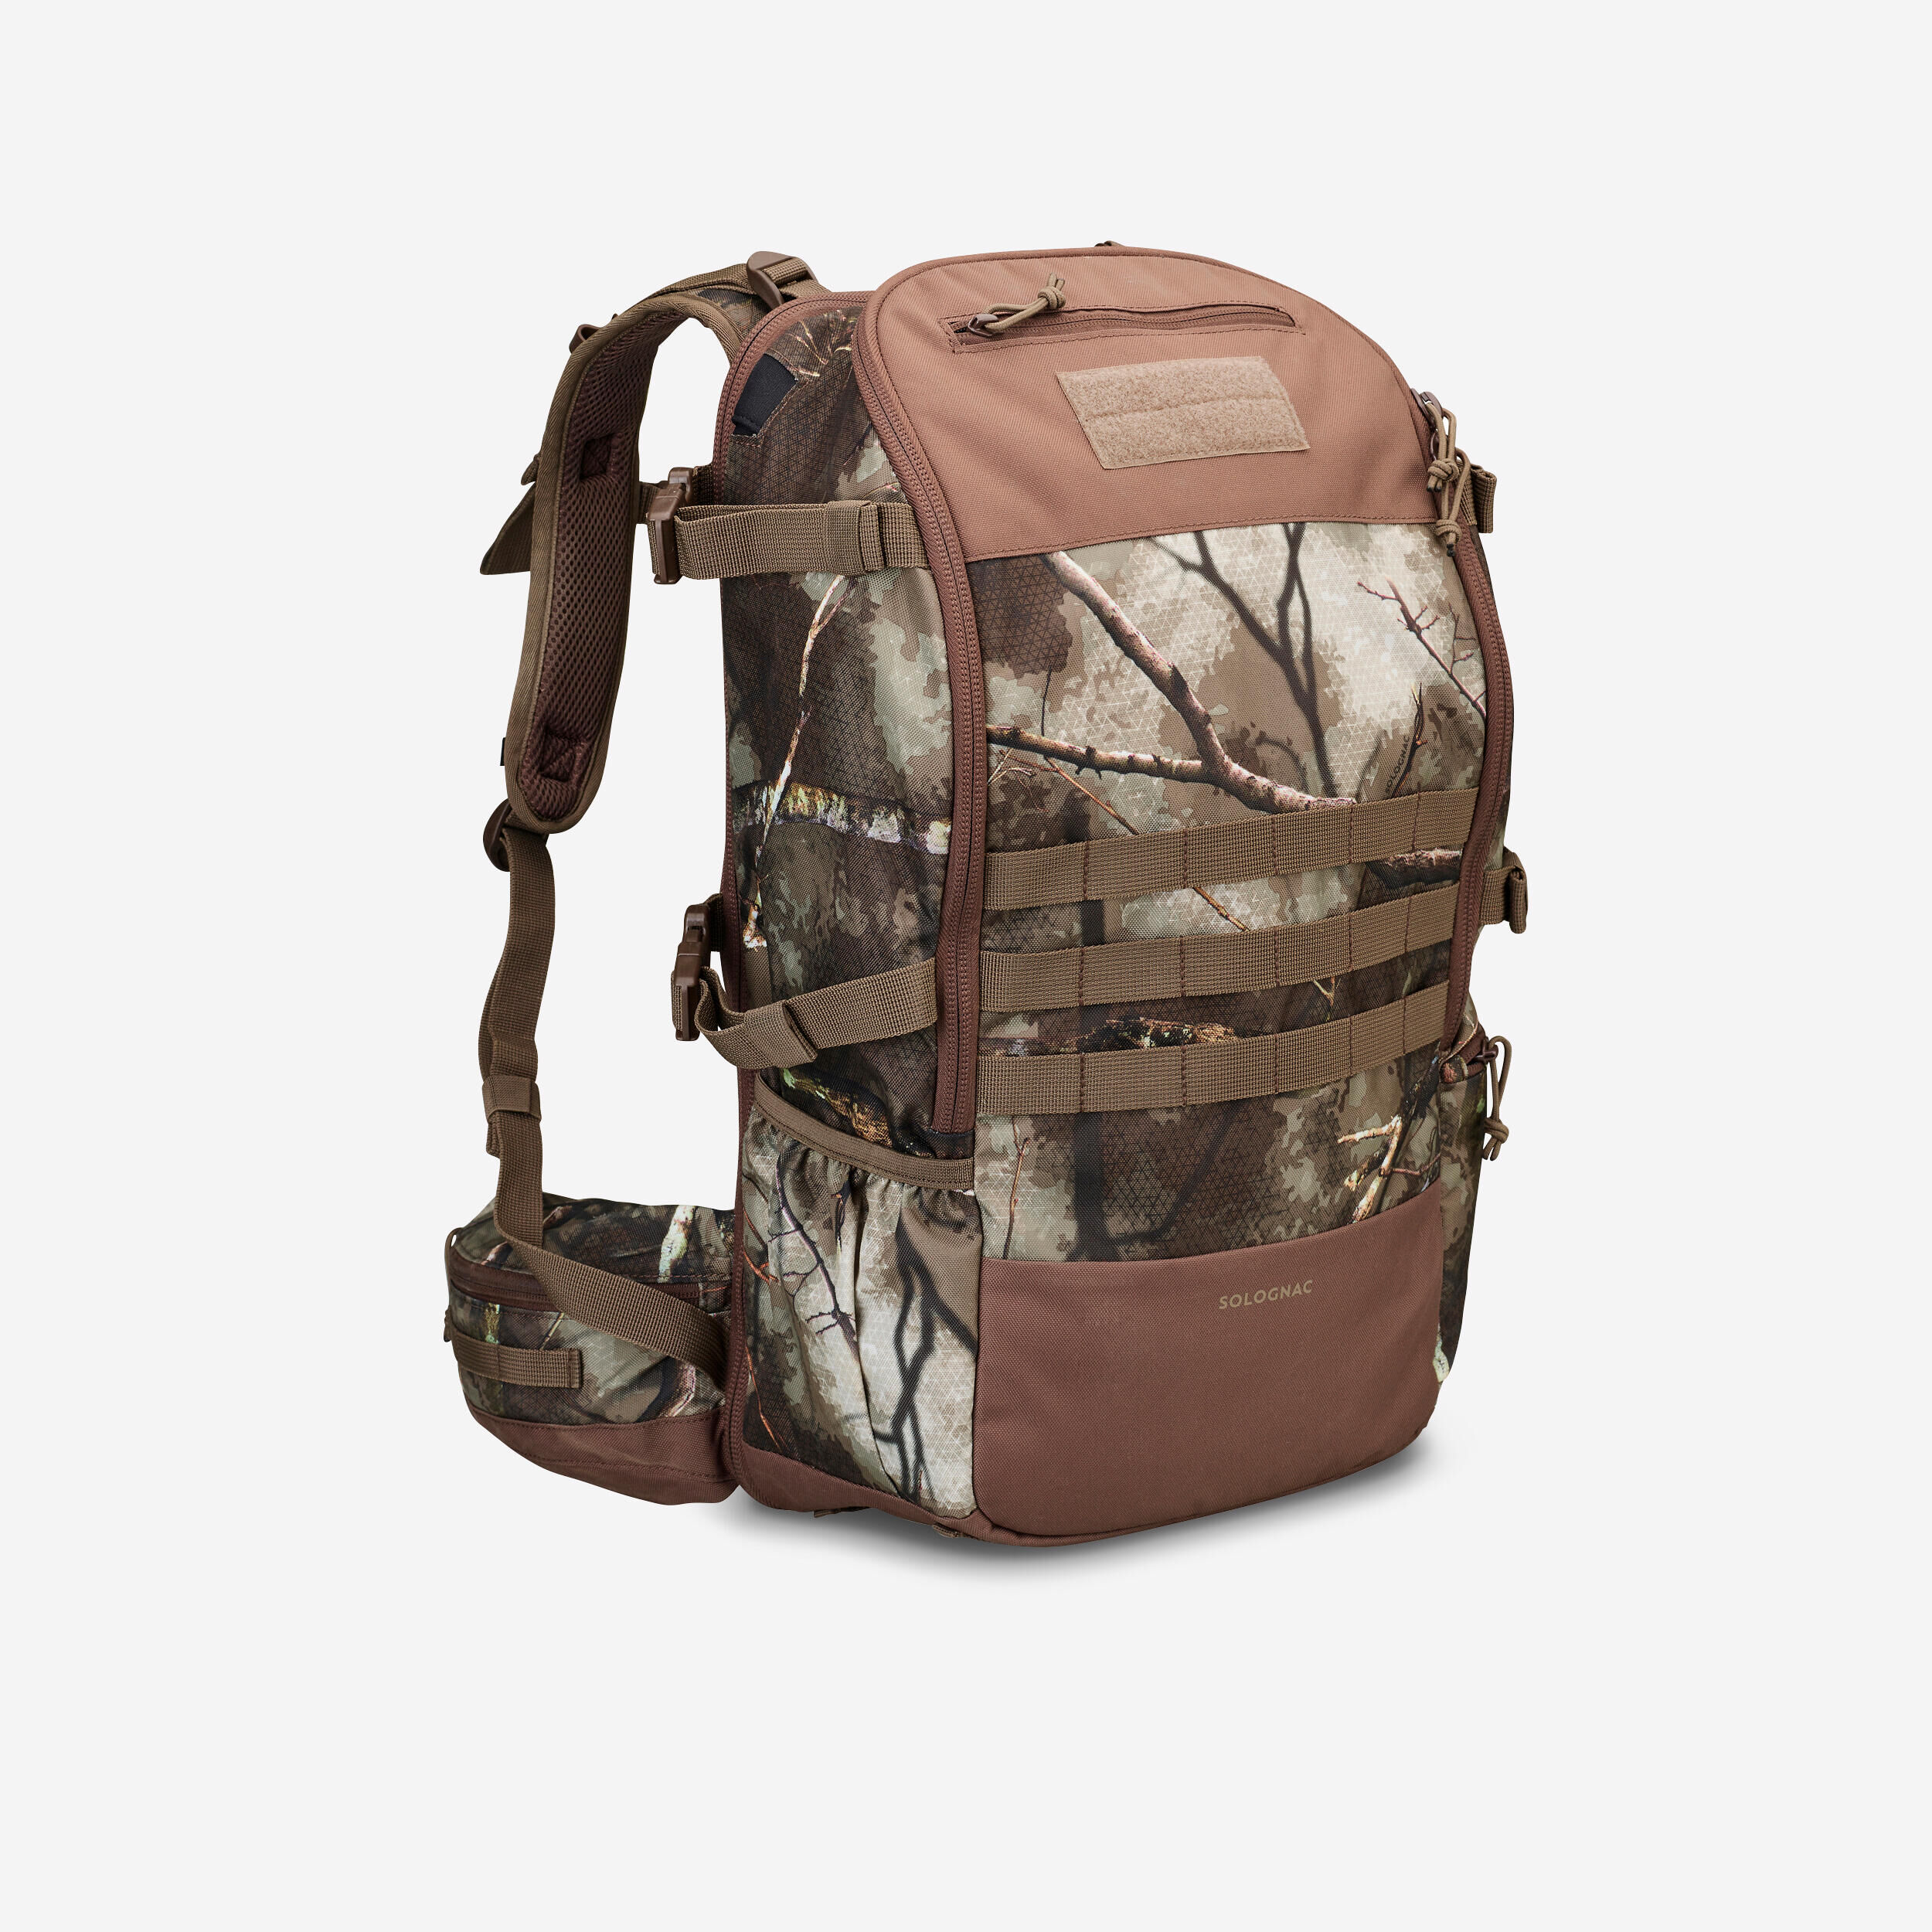 SOLOGNAC X-Access Compact Country Sport Backpack 45 Litre Treemetic Camouflage